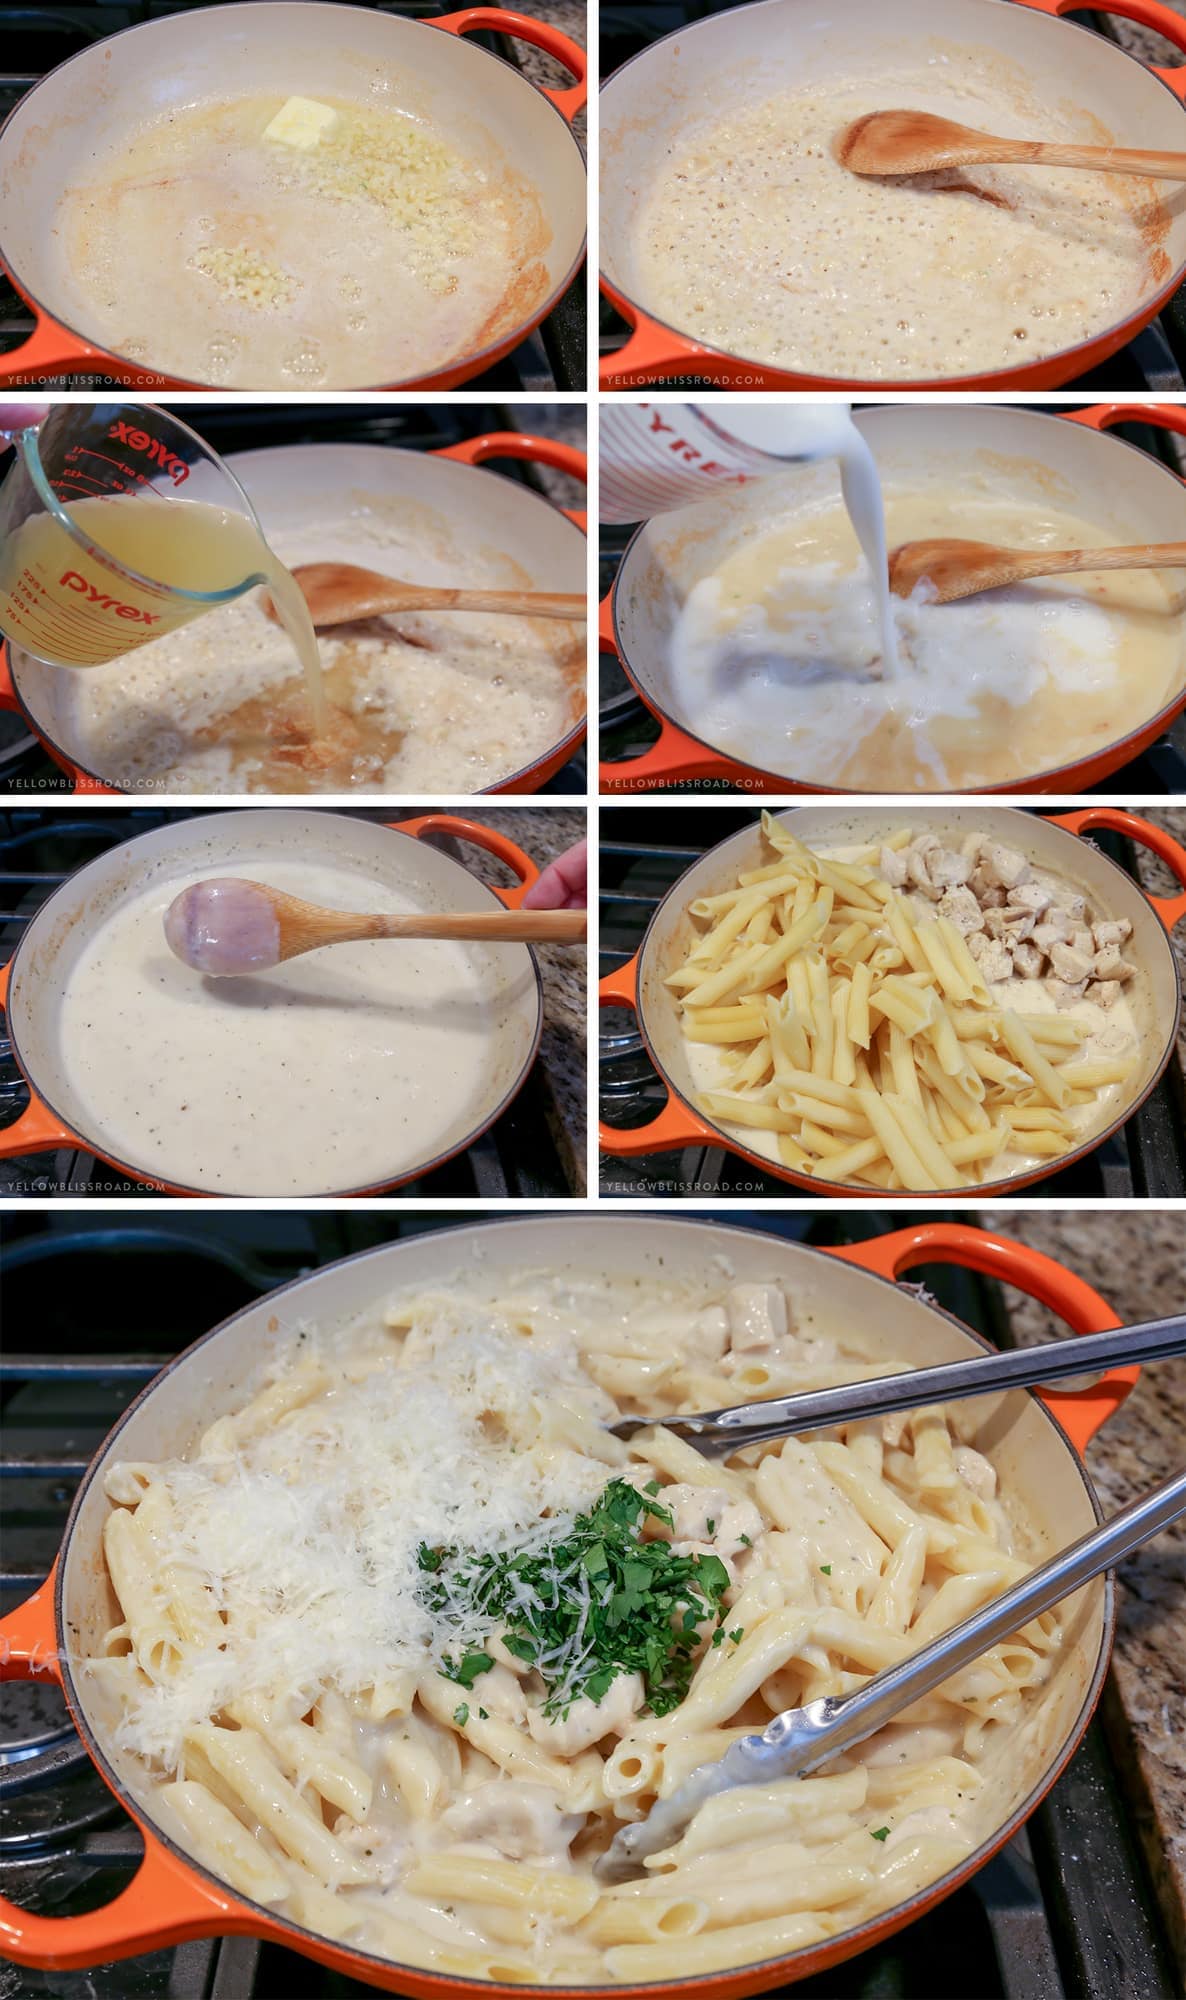 How to Make Creamy Garlic Penne Pasta with Chicken shown in a collage of photos.